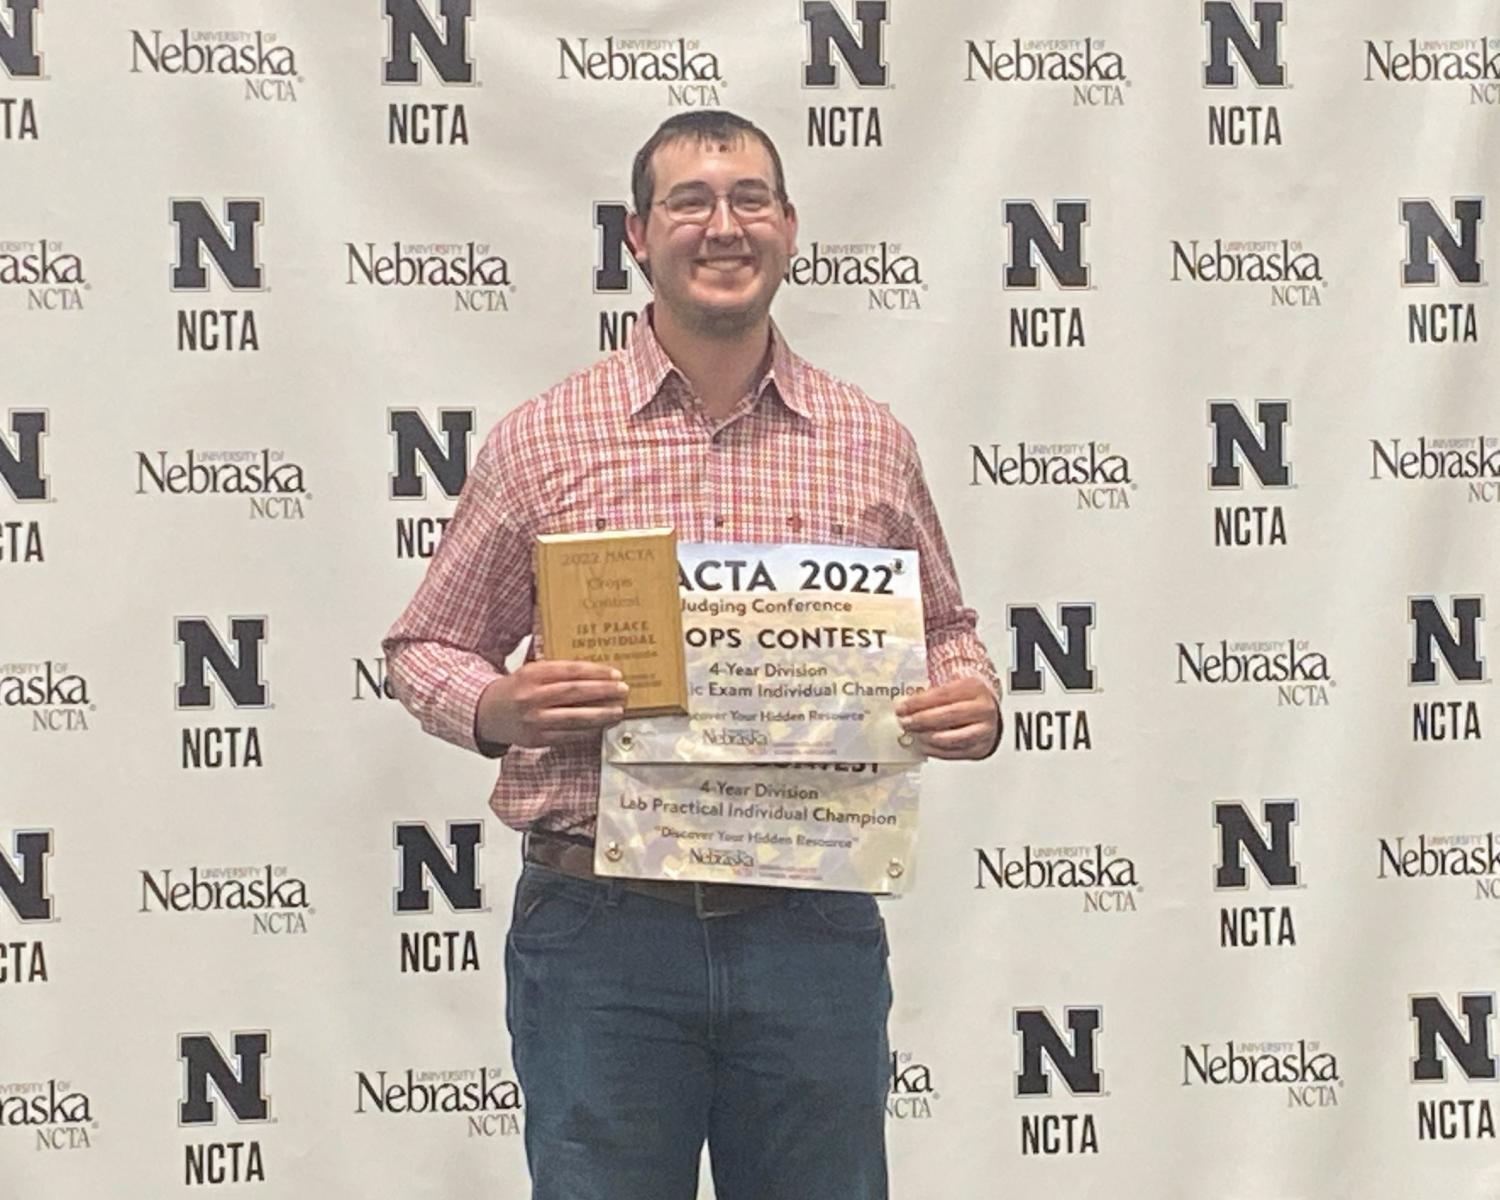 Korbin Kudera made Husker history and became the first Nebraska agronomy student to earn first-place individual overall in both the crops contest and the precision agriculture contest.
 